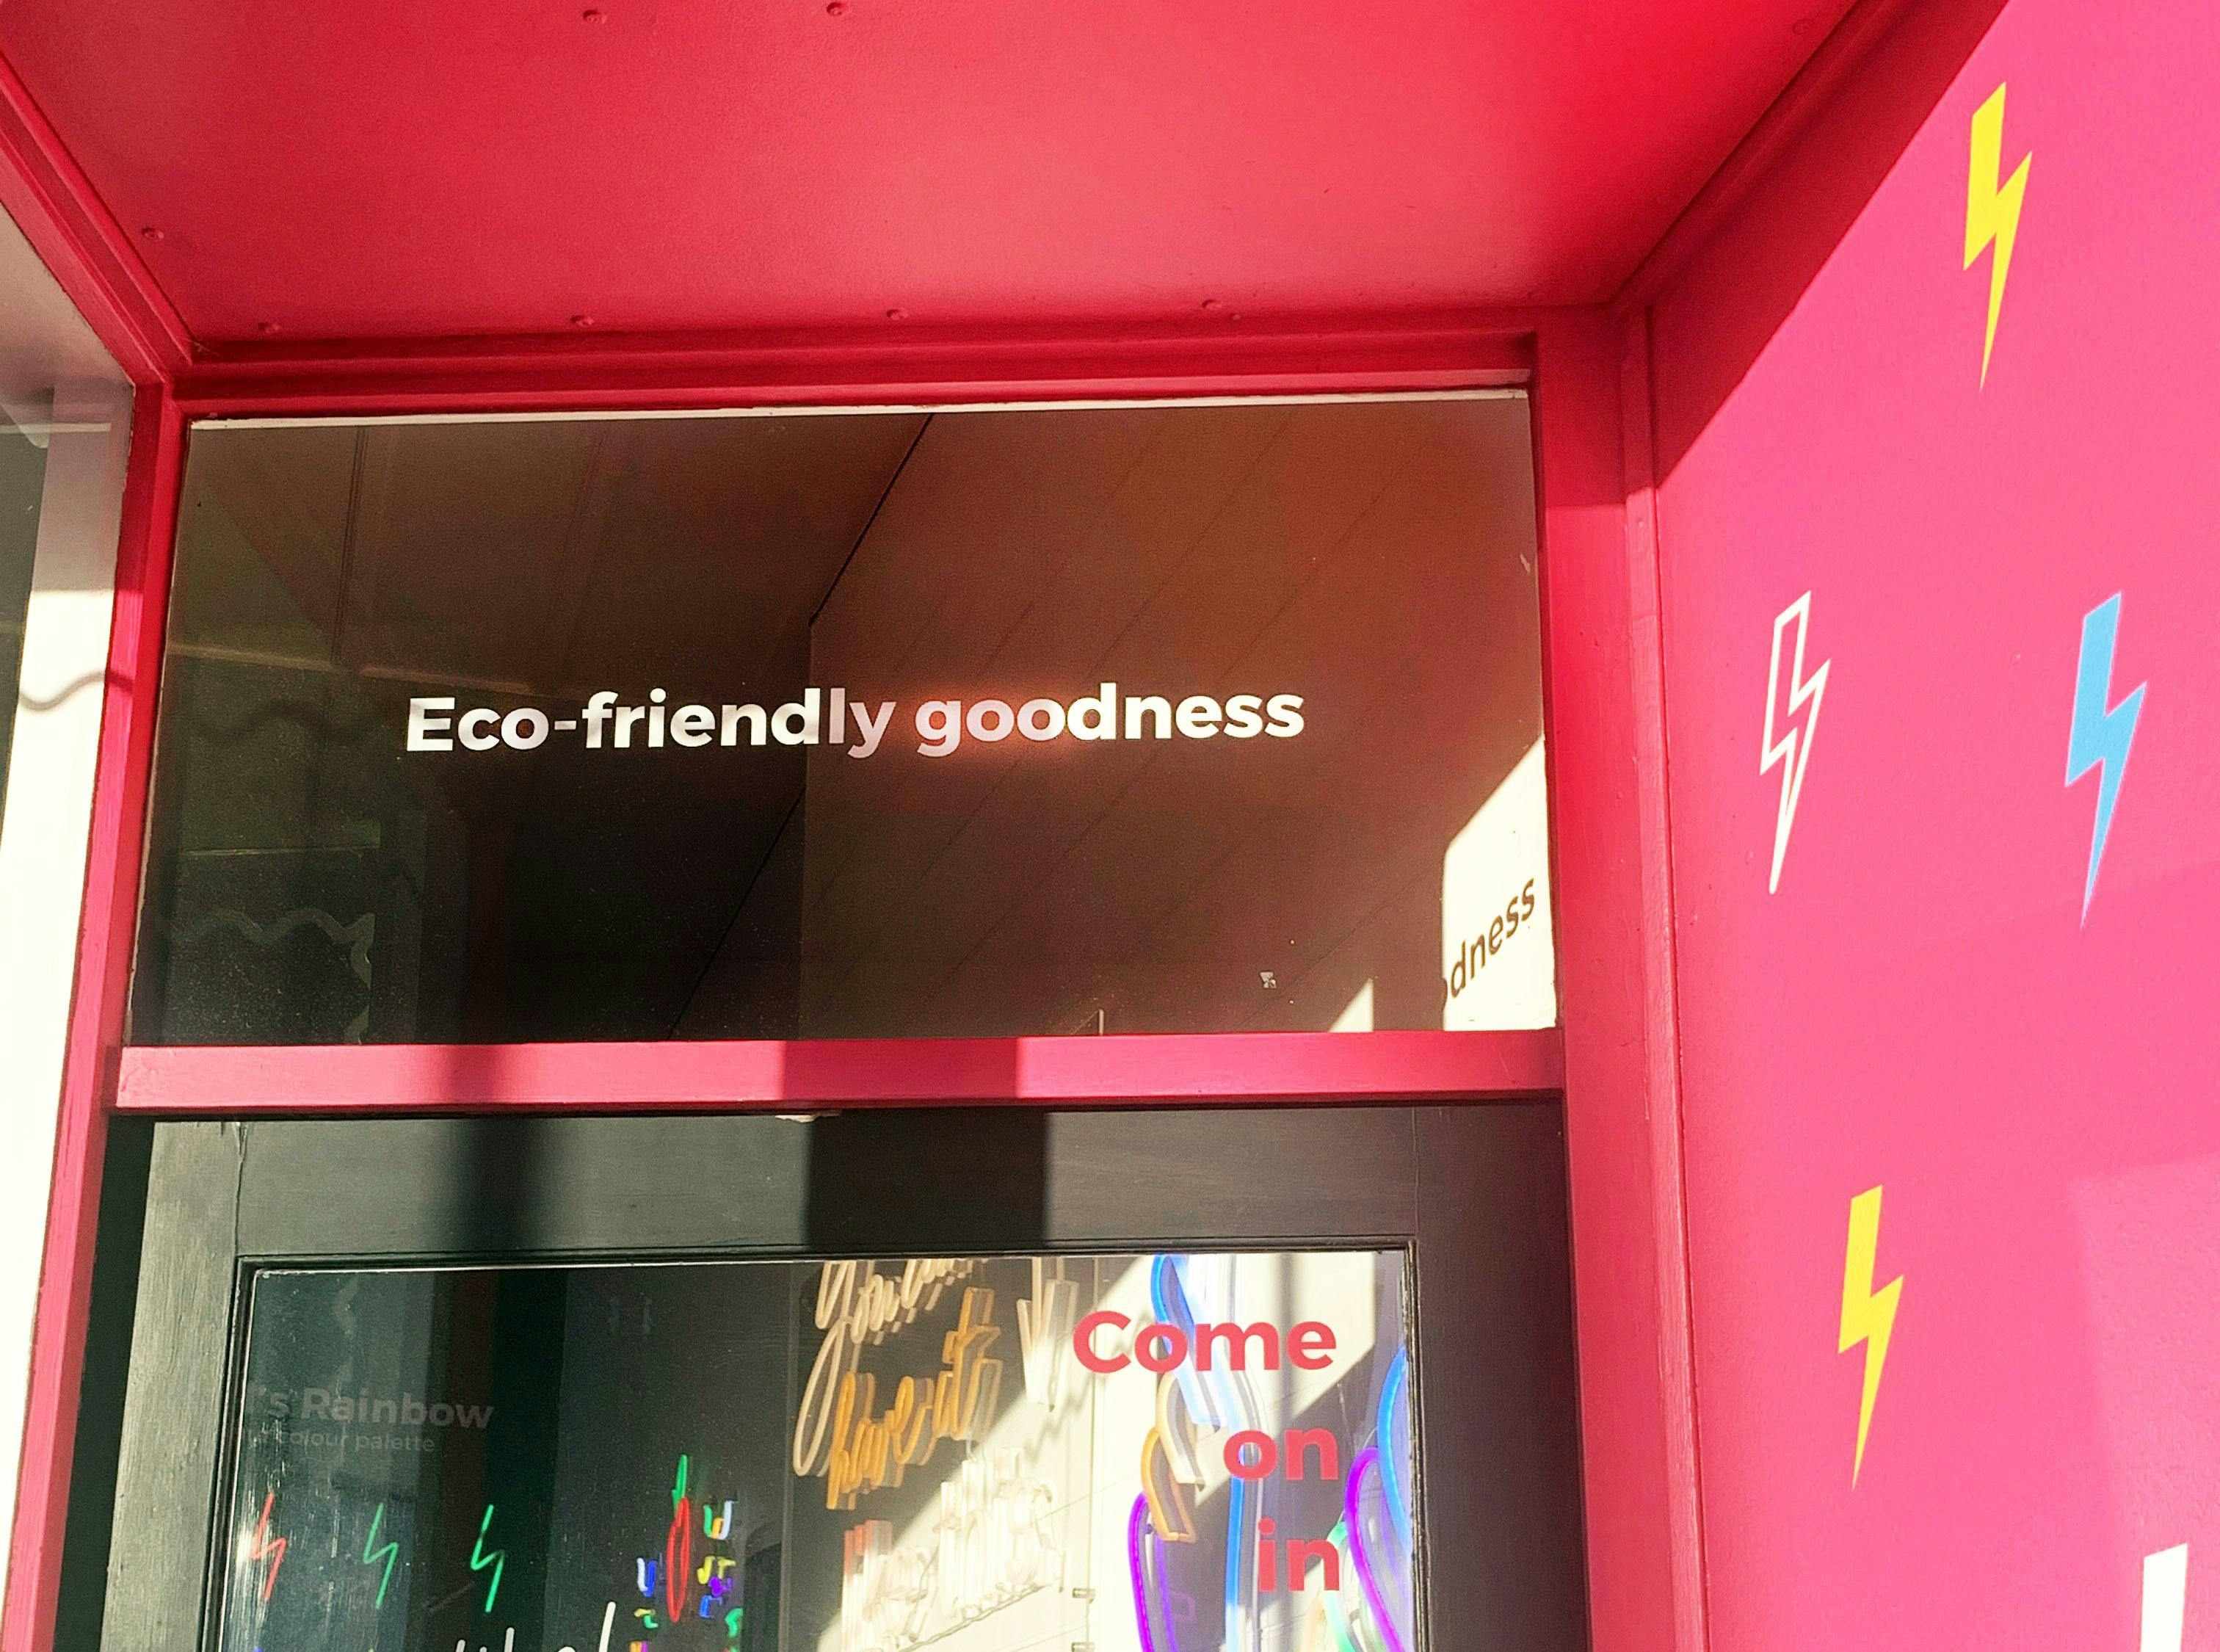 a neon sign at a store saying ‘Eco-friendly goodness’